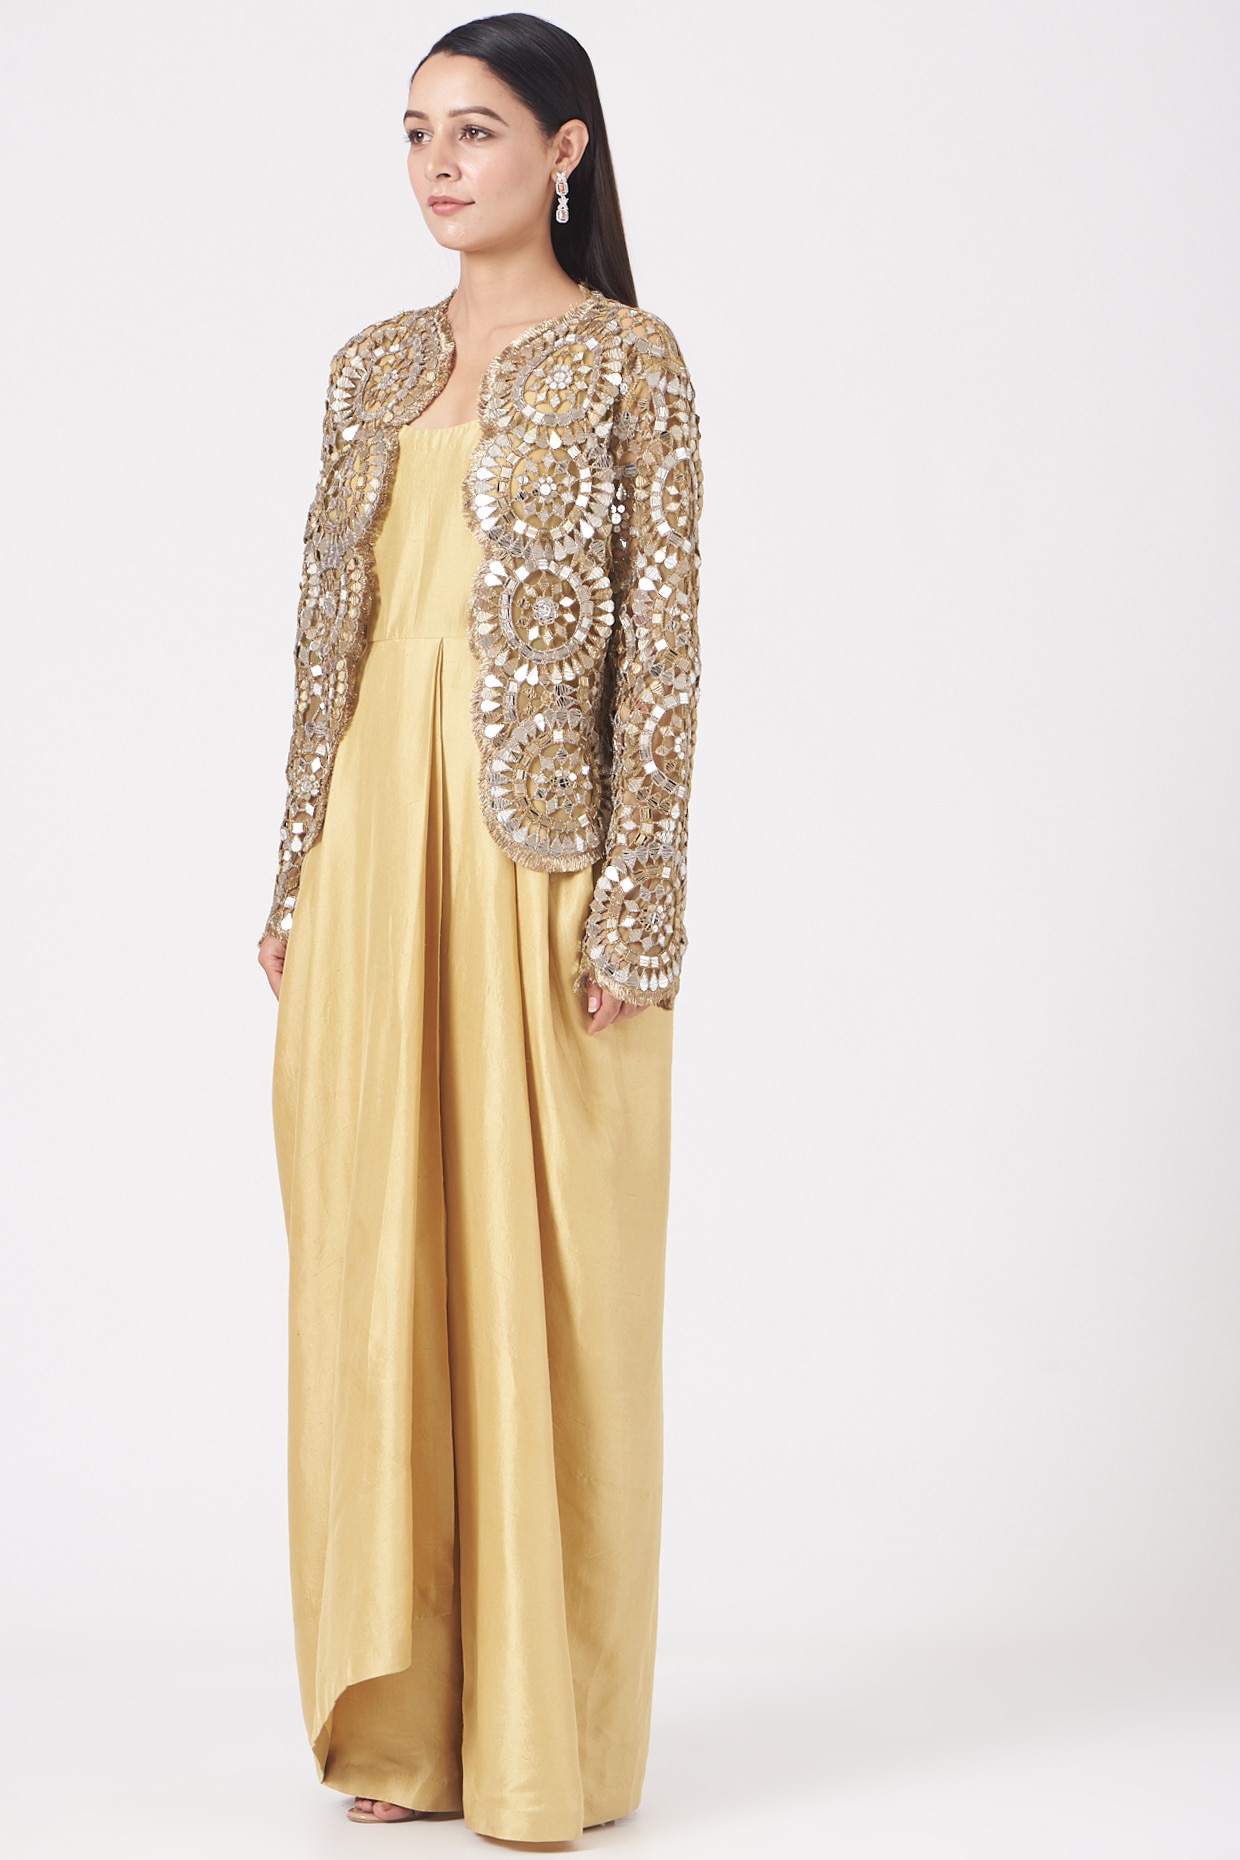 Long Formal Jacket Dress for the Mother of the Bride– sheerdreamz